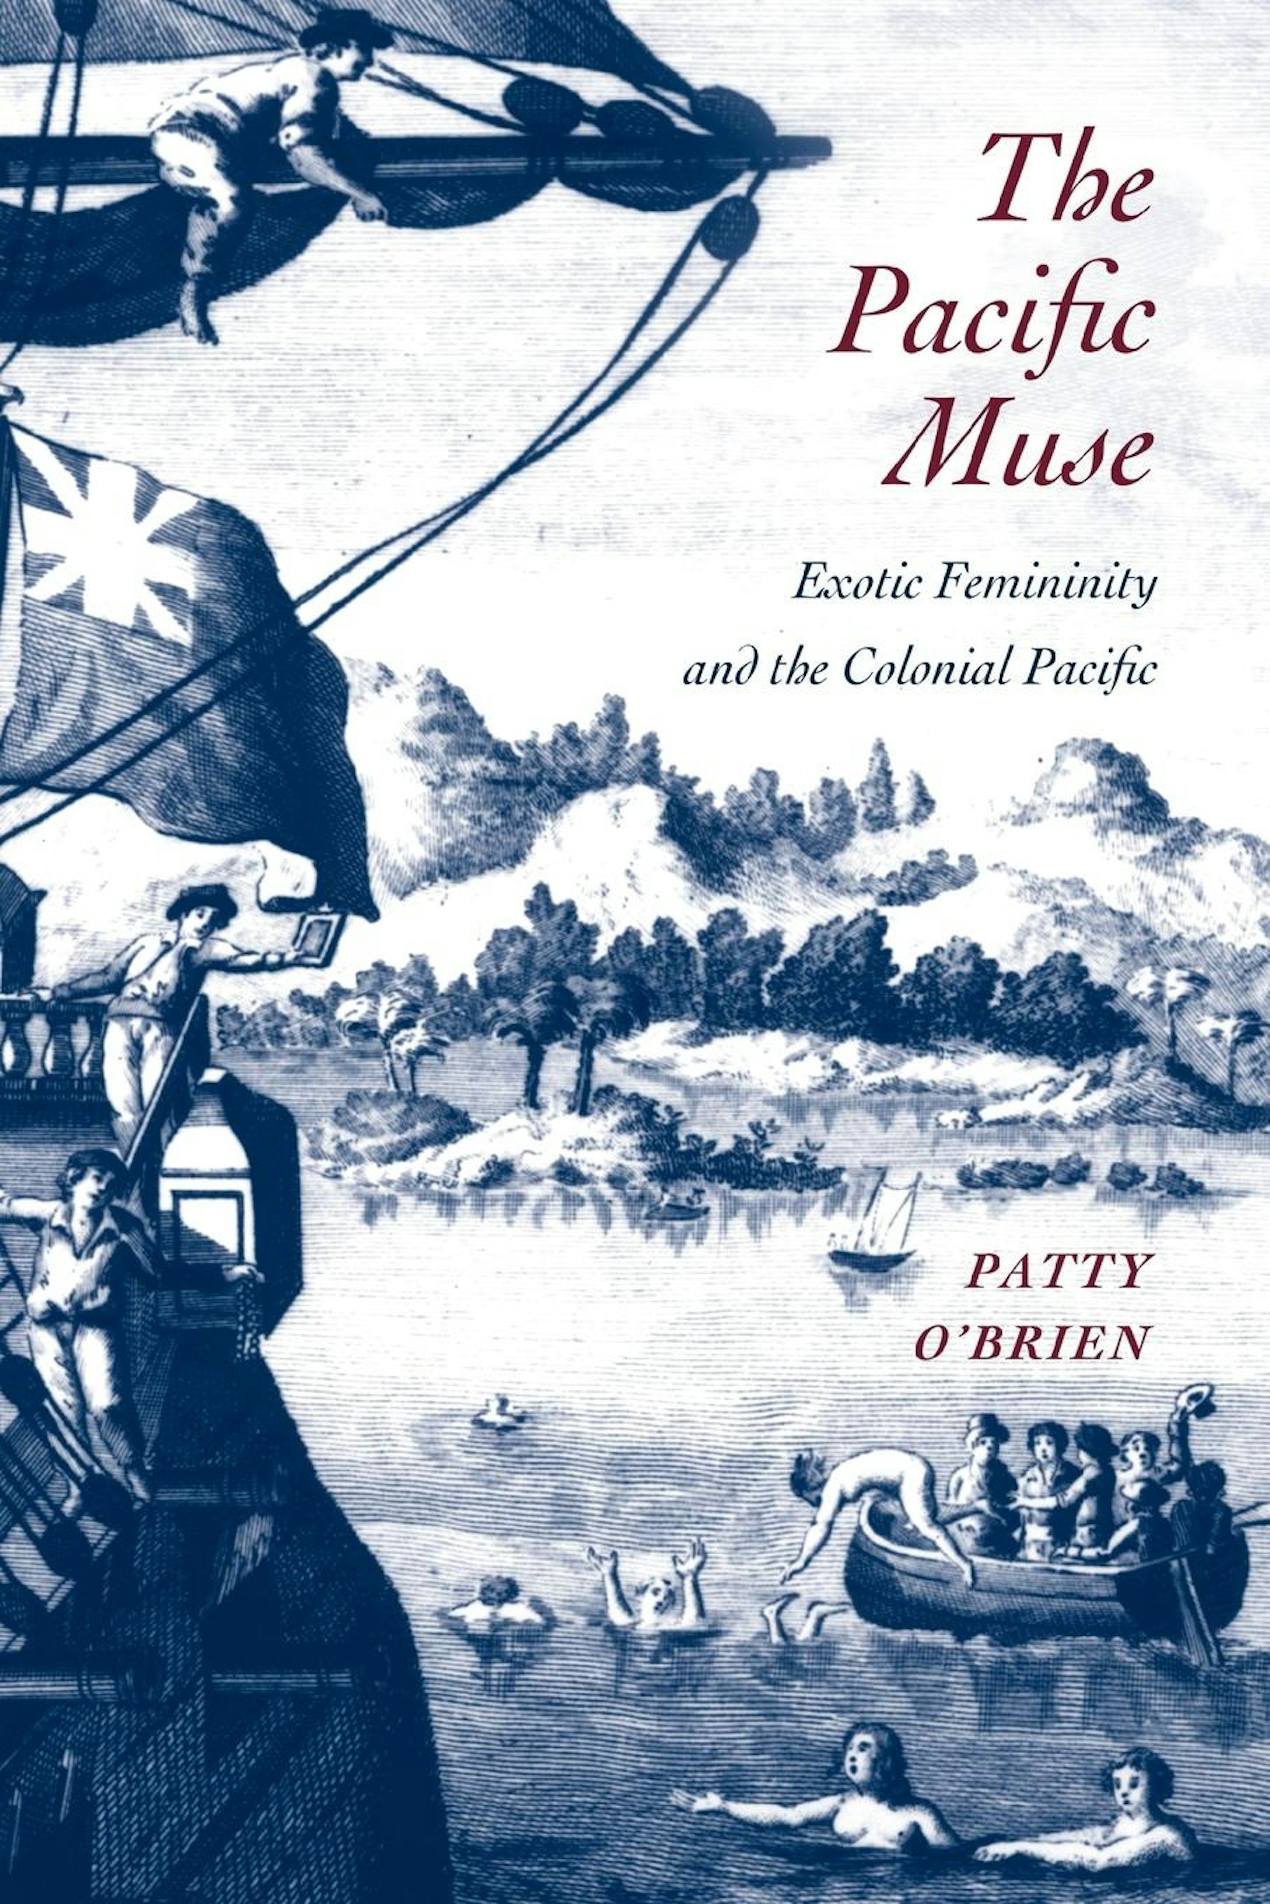 The Pacific Muse